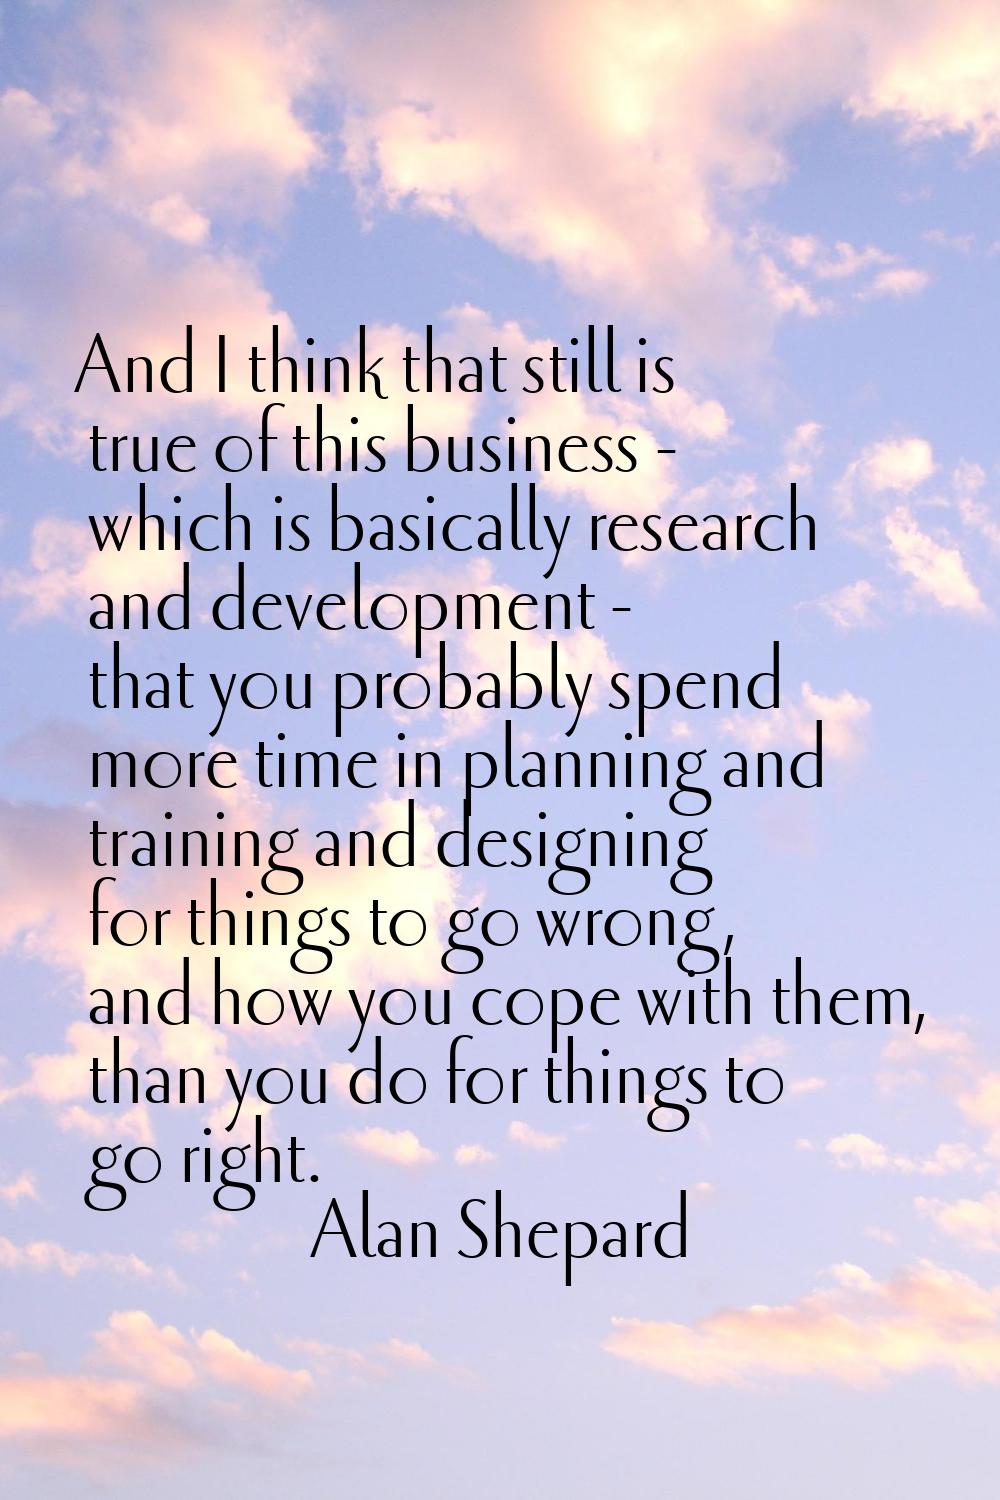 And I think that still is true of this business - which is basically research and development - tha